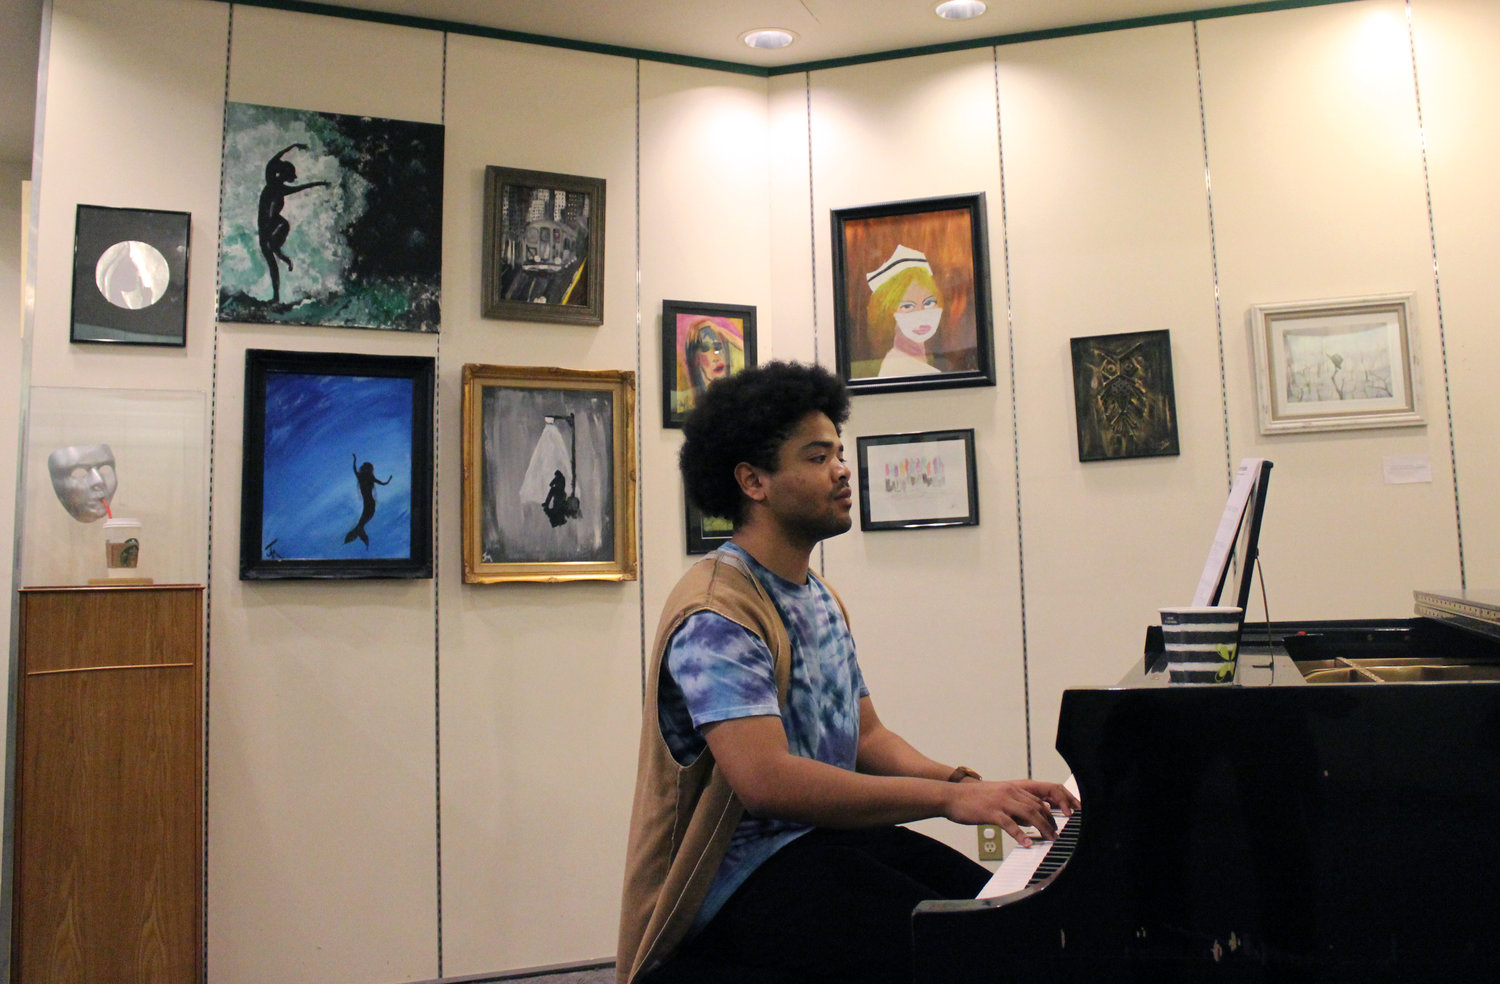 Richard Arriaga played piano while guests browsed the gallery.